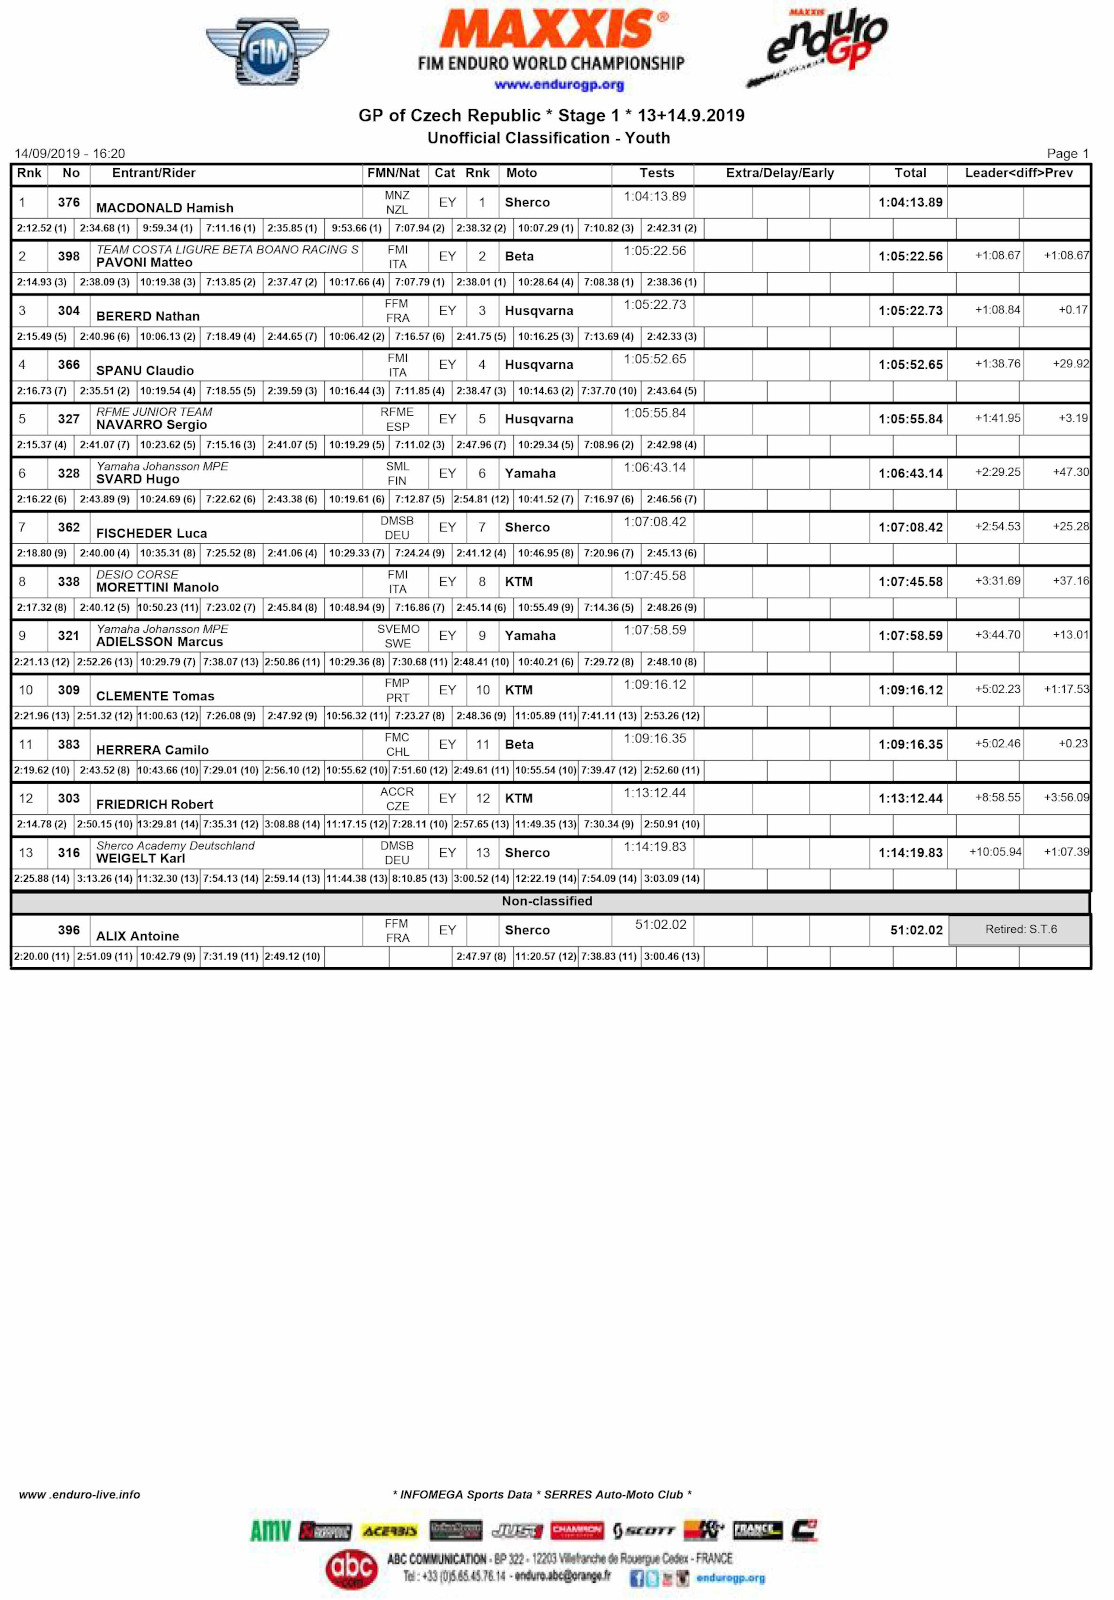 czech_gp_results_day_1_youth